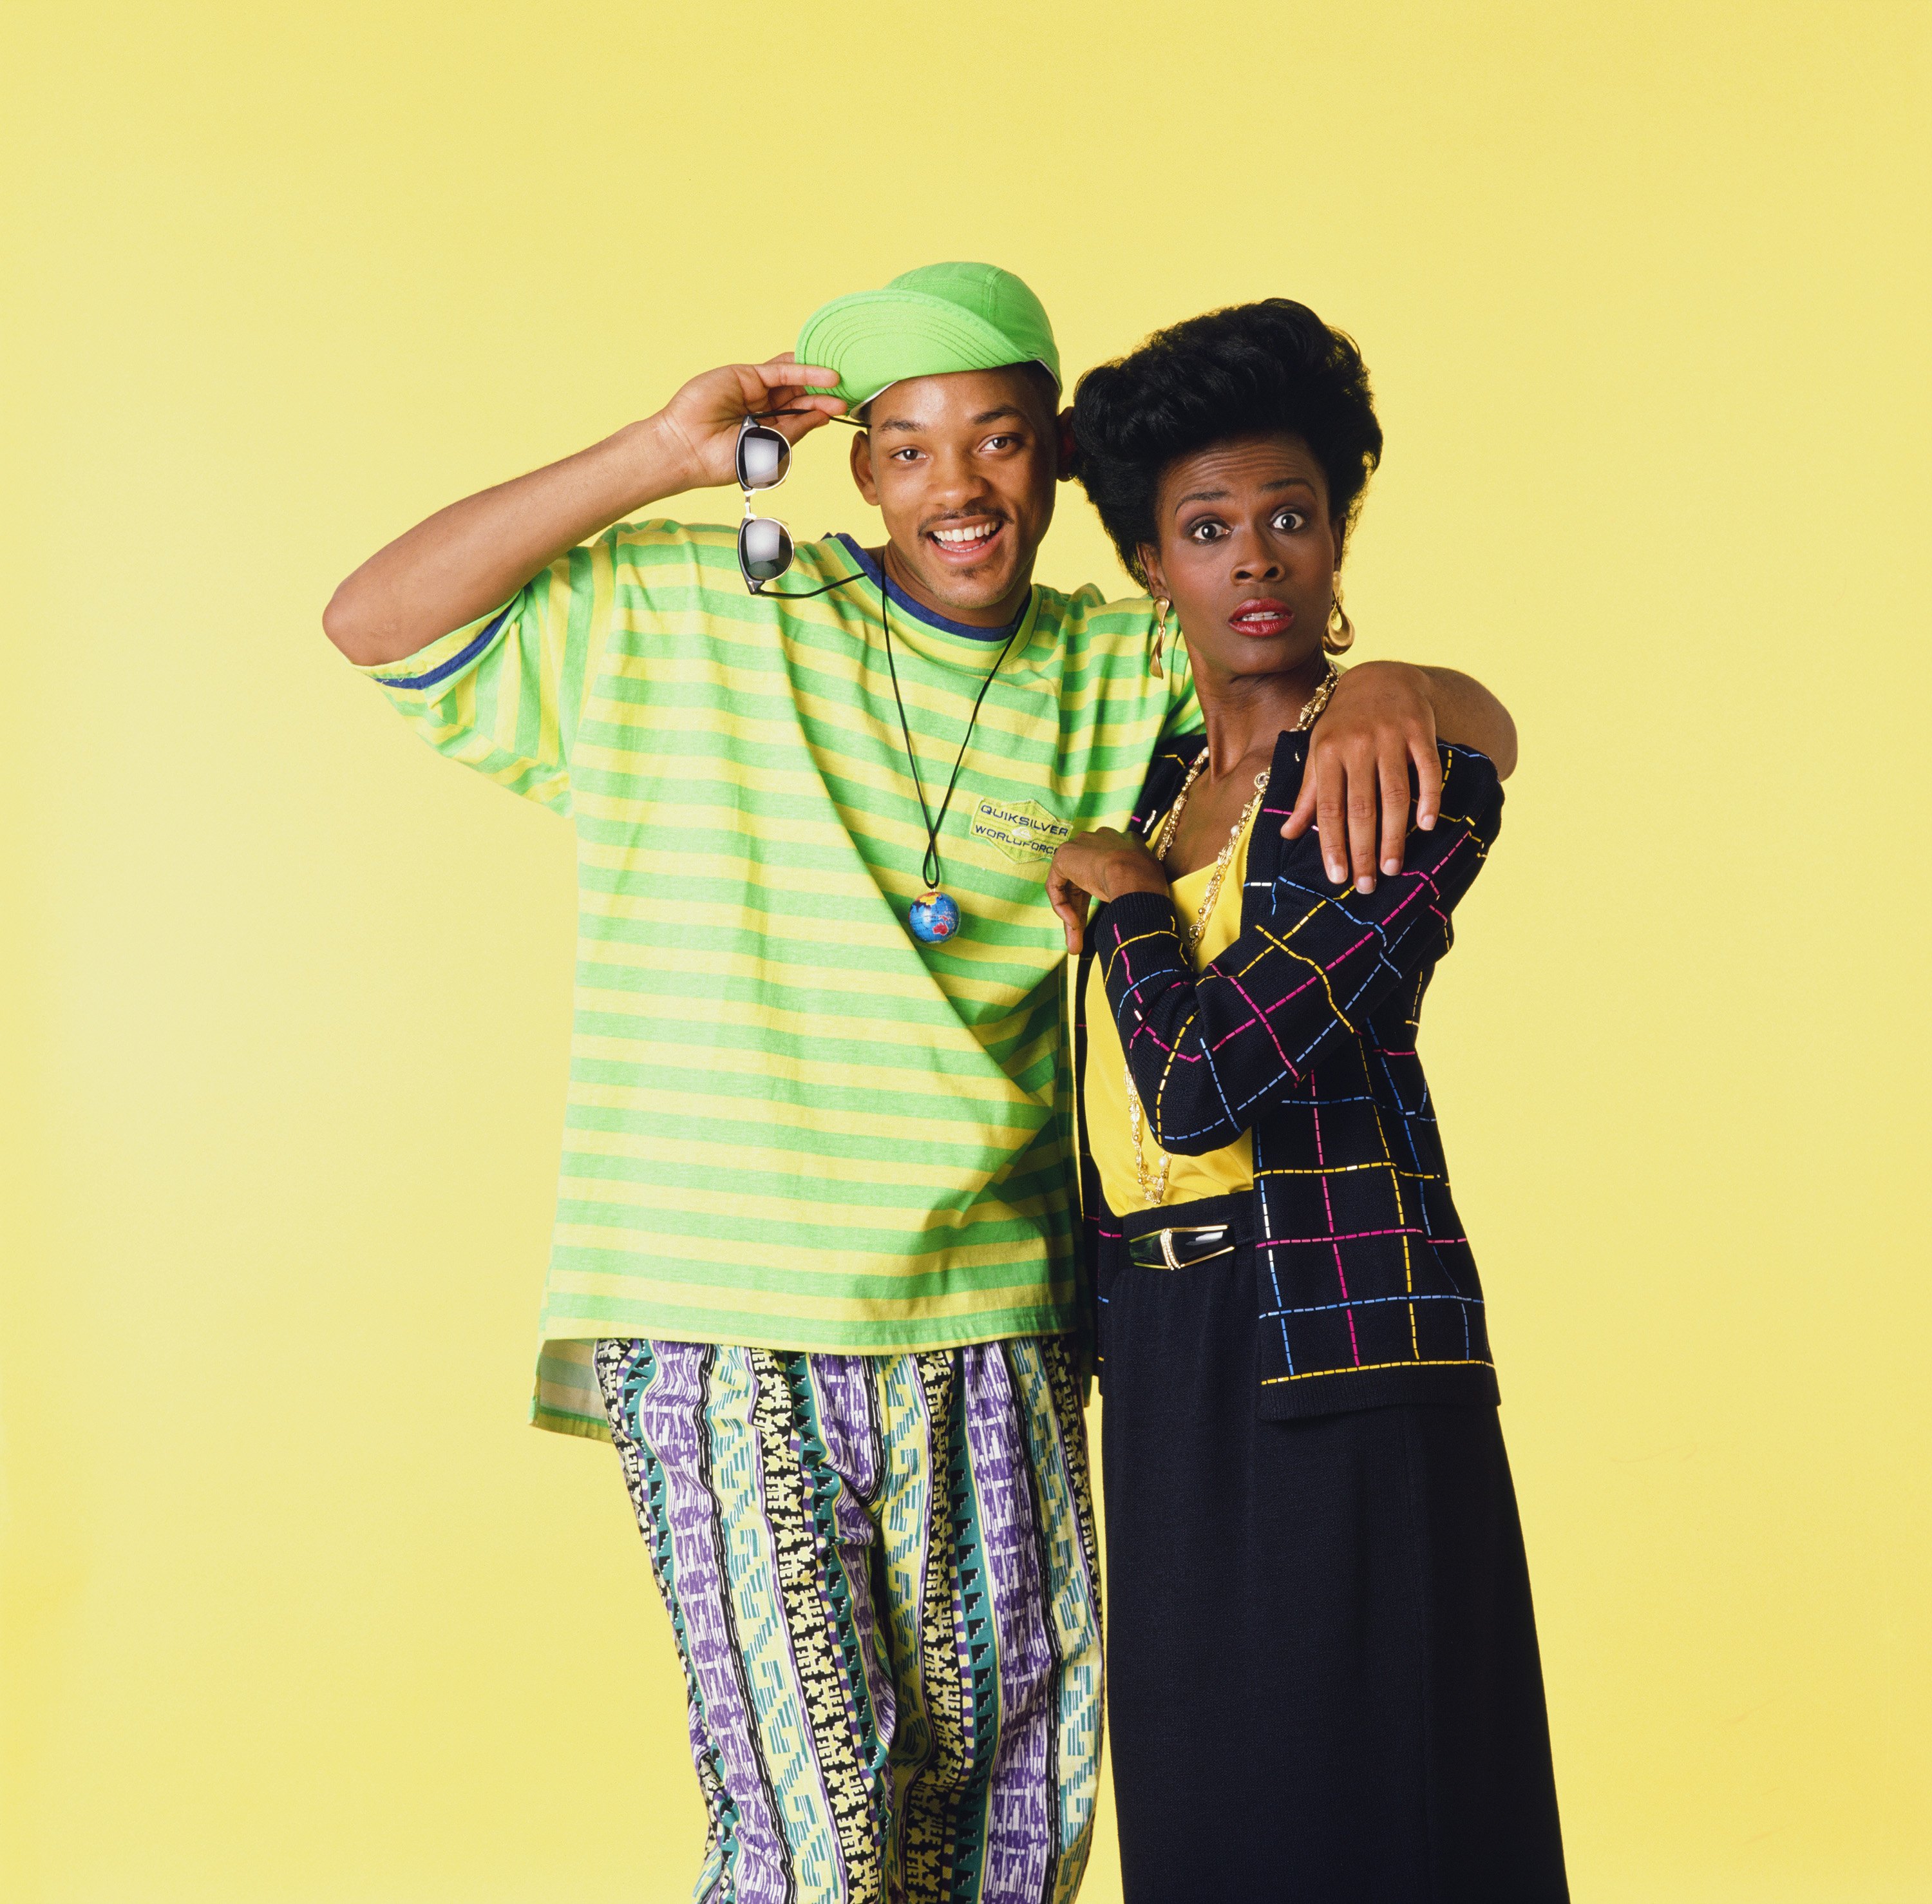 'Fresh Prince of Bel-Air' star Will Smith puts his arm around Aunt Viv actor Janet Hubert